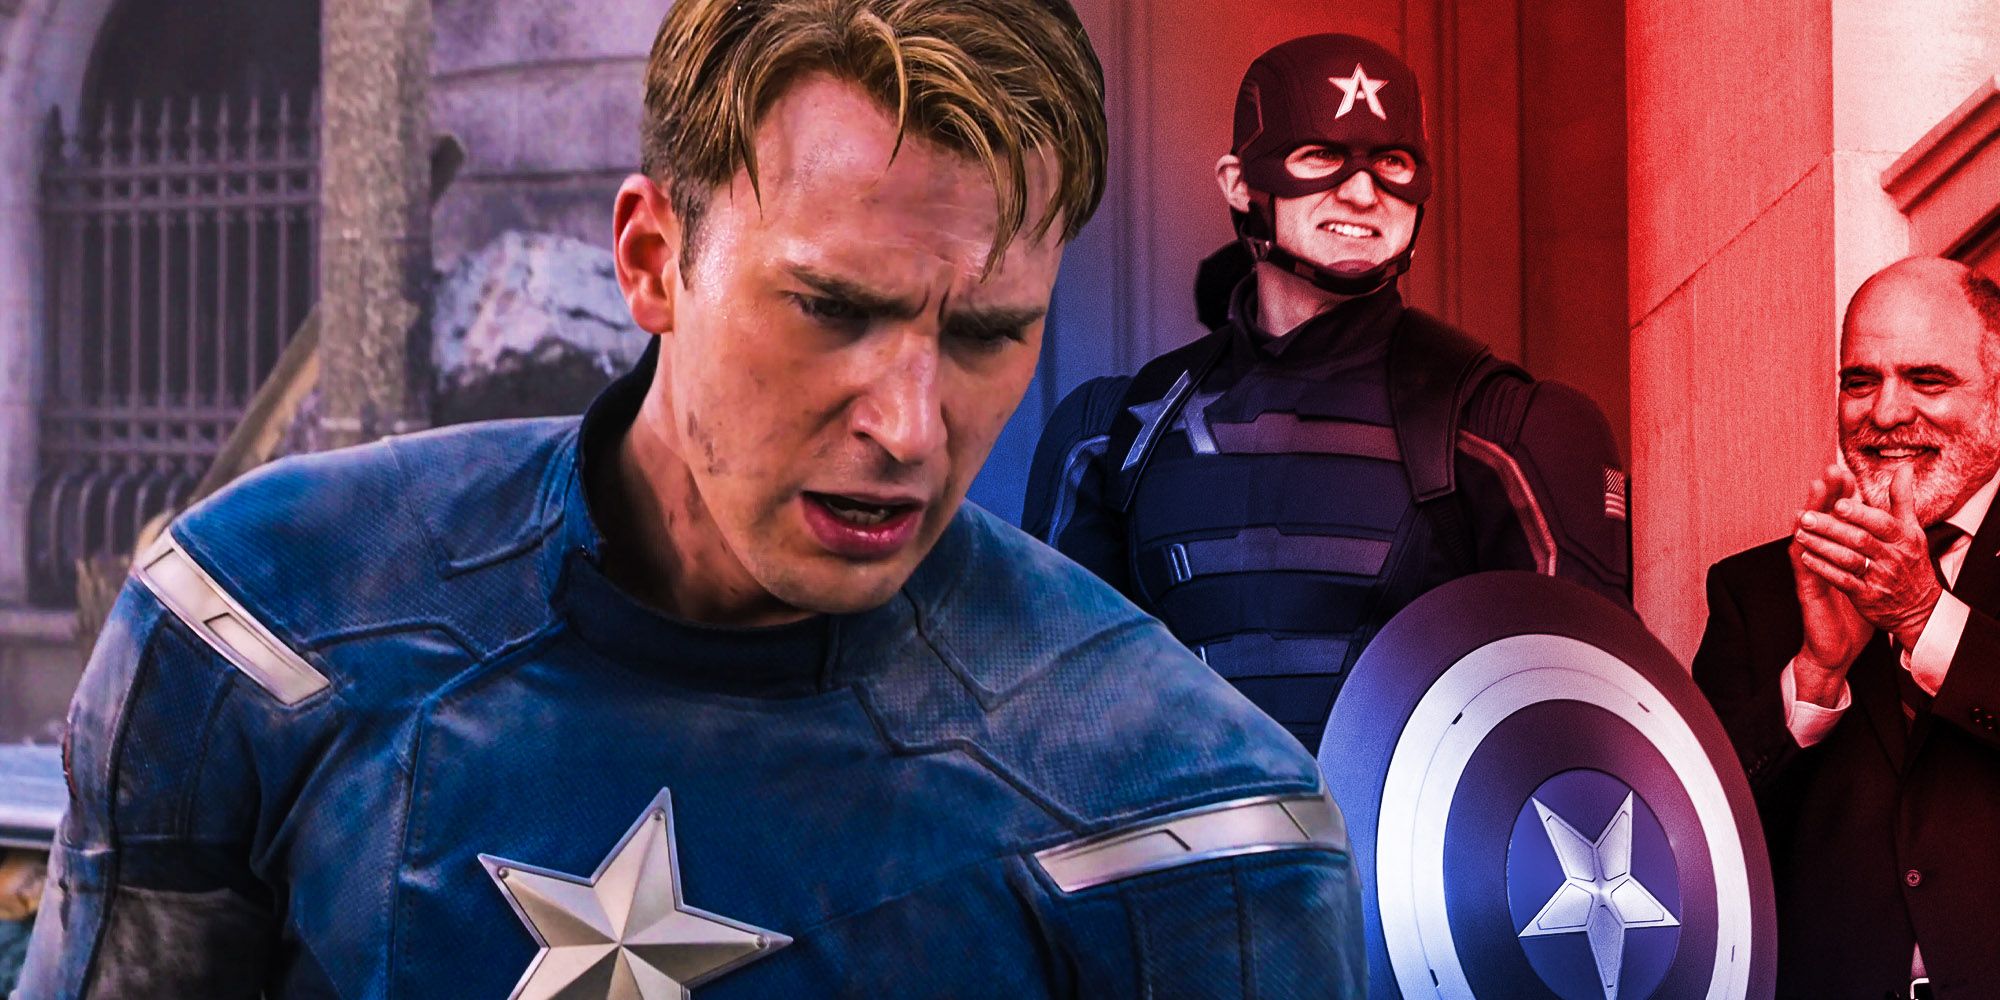 Captain america always destined to fail Steve Rogers John walker falcon and the winter soldier